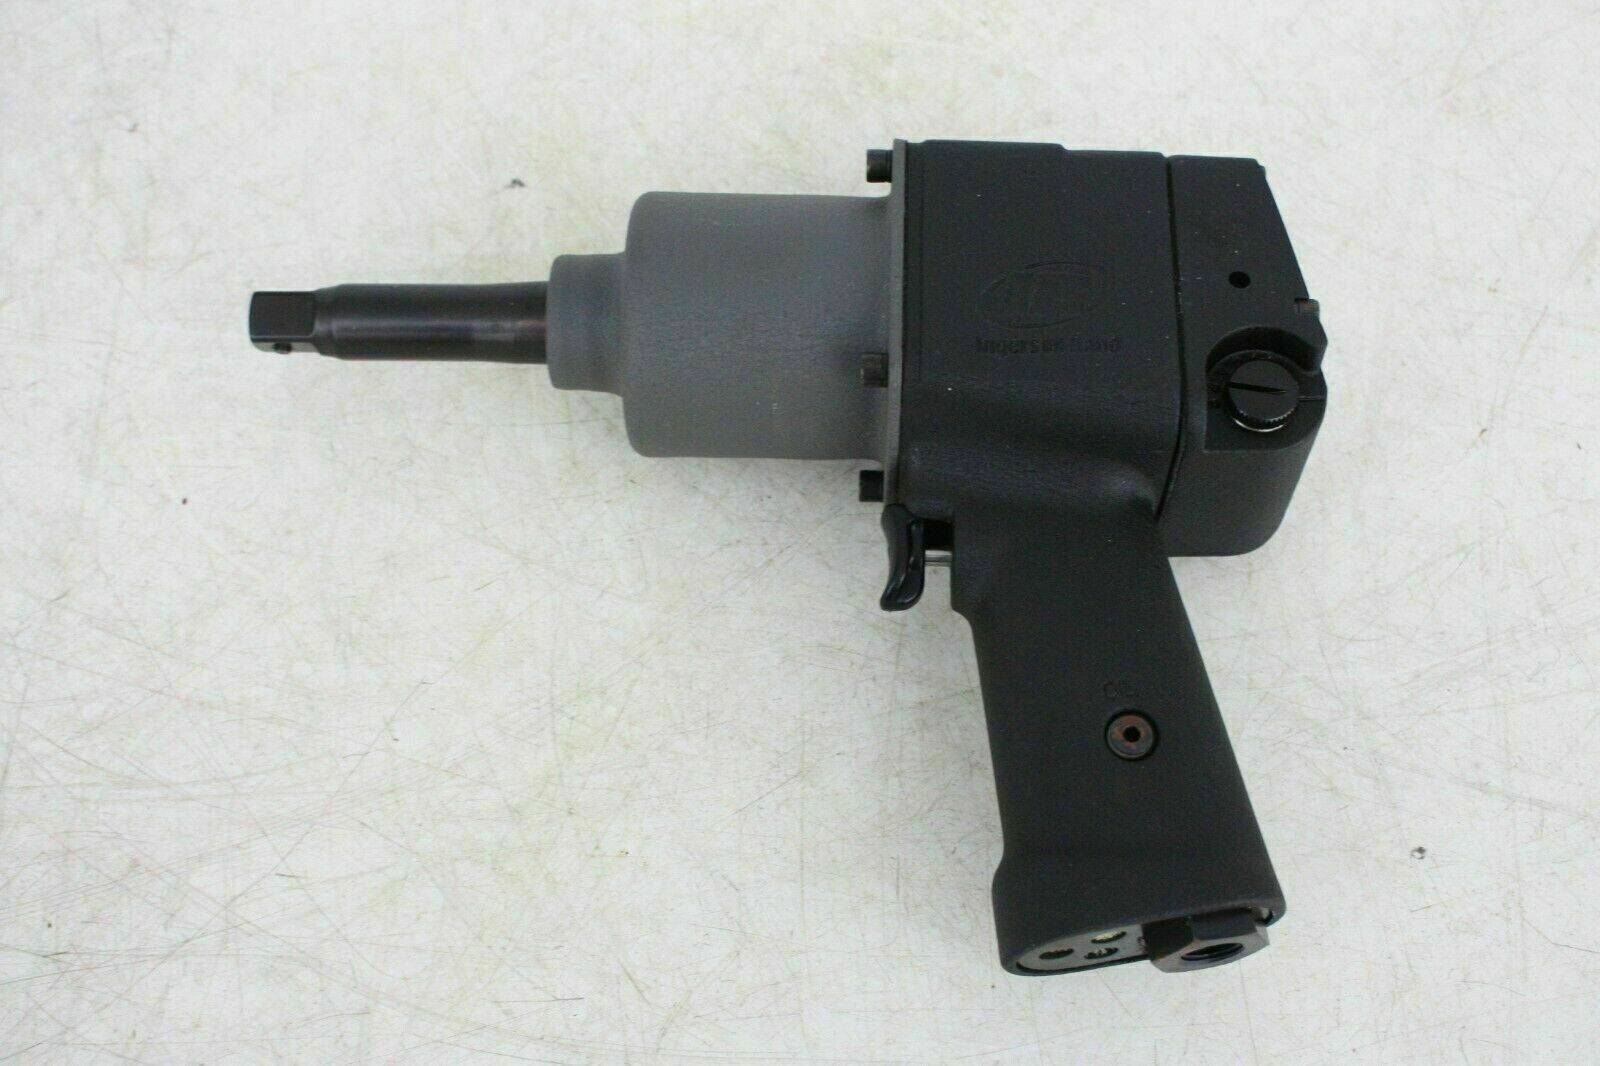 Ingersoll-Rand-air-impact-wrench-2906p-impactool-175431113092